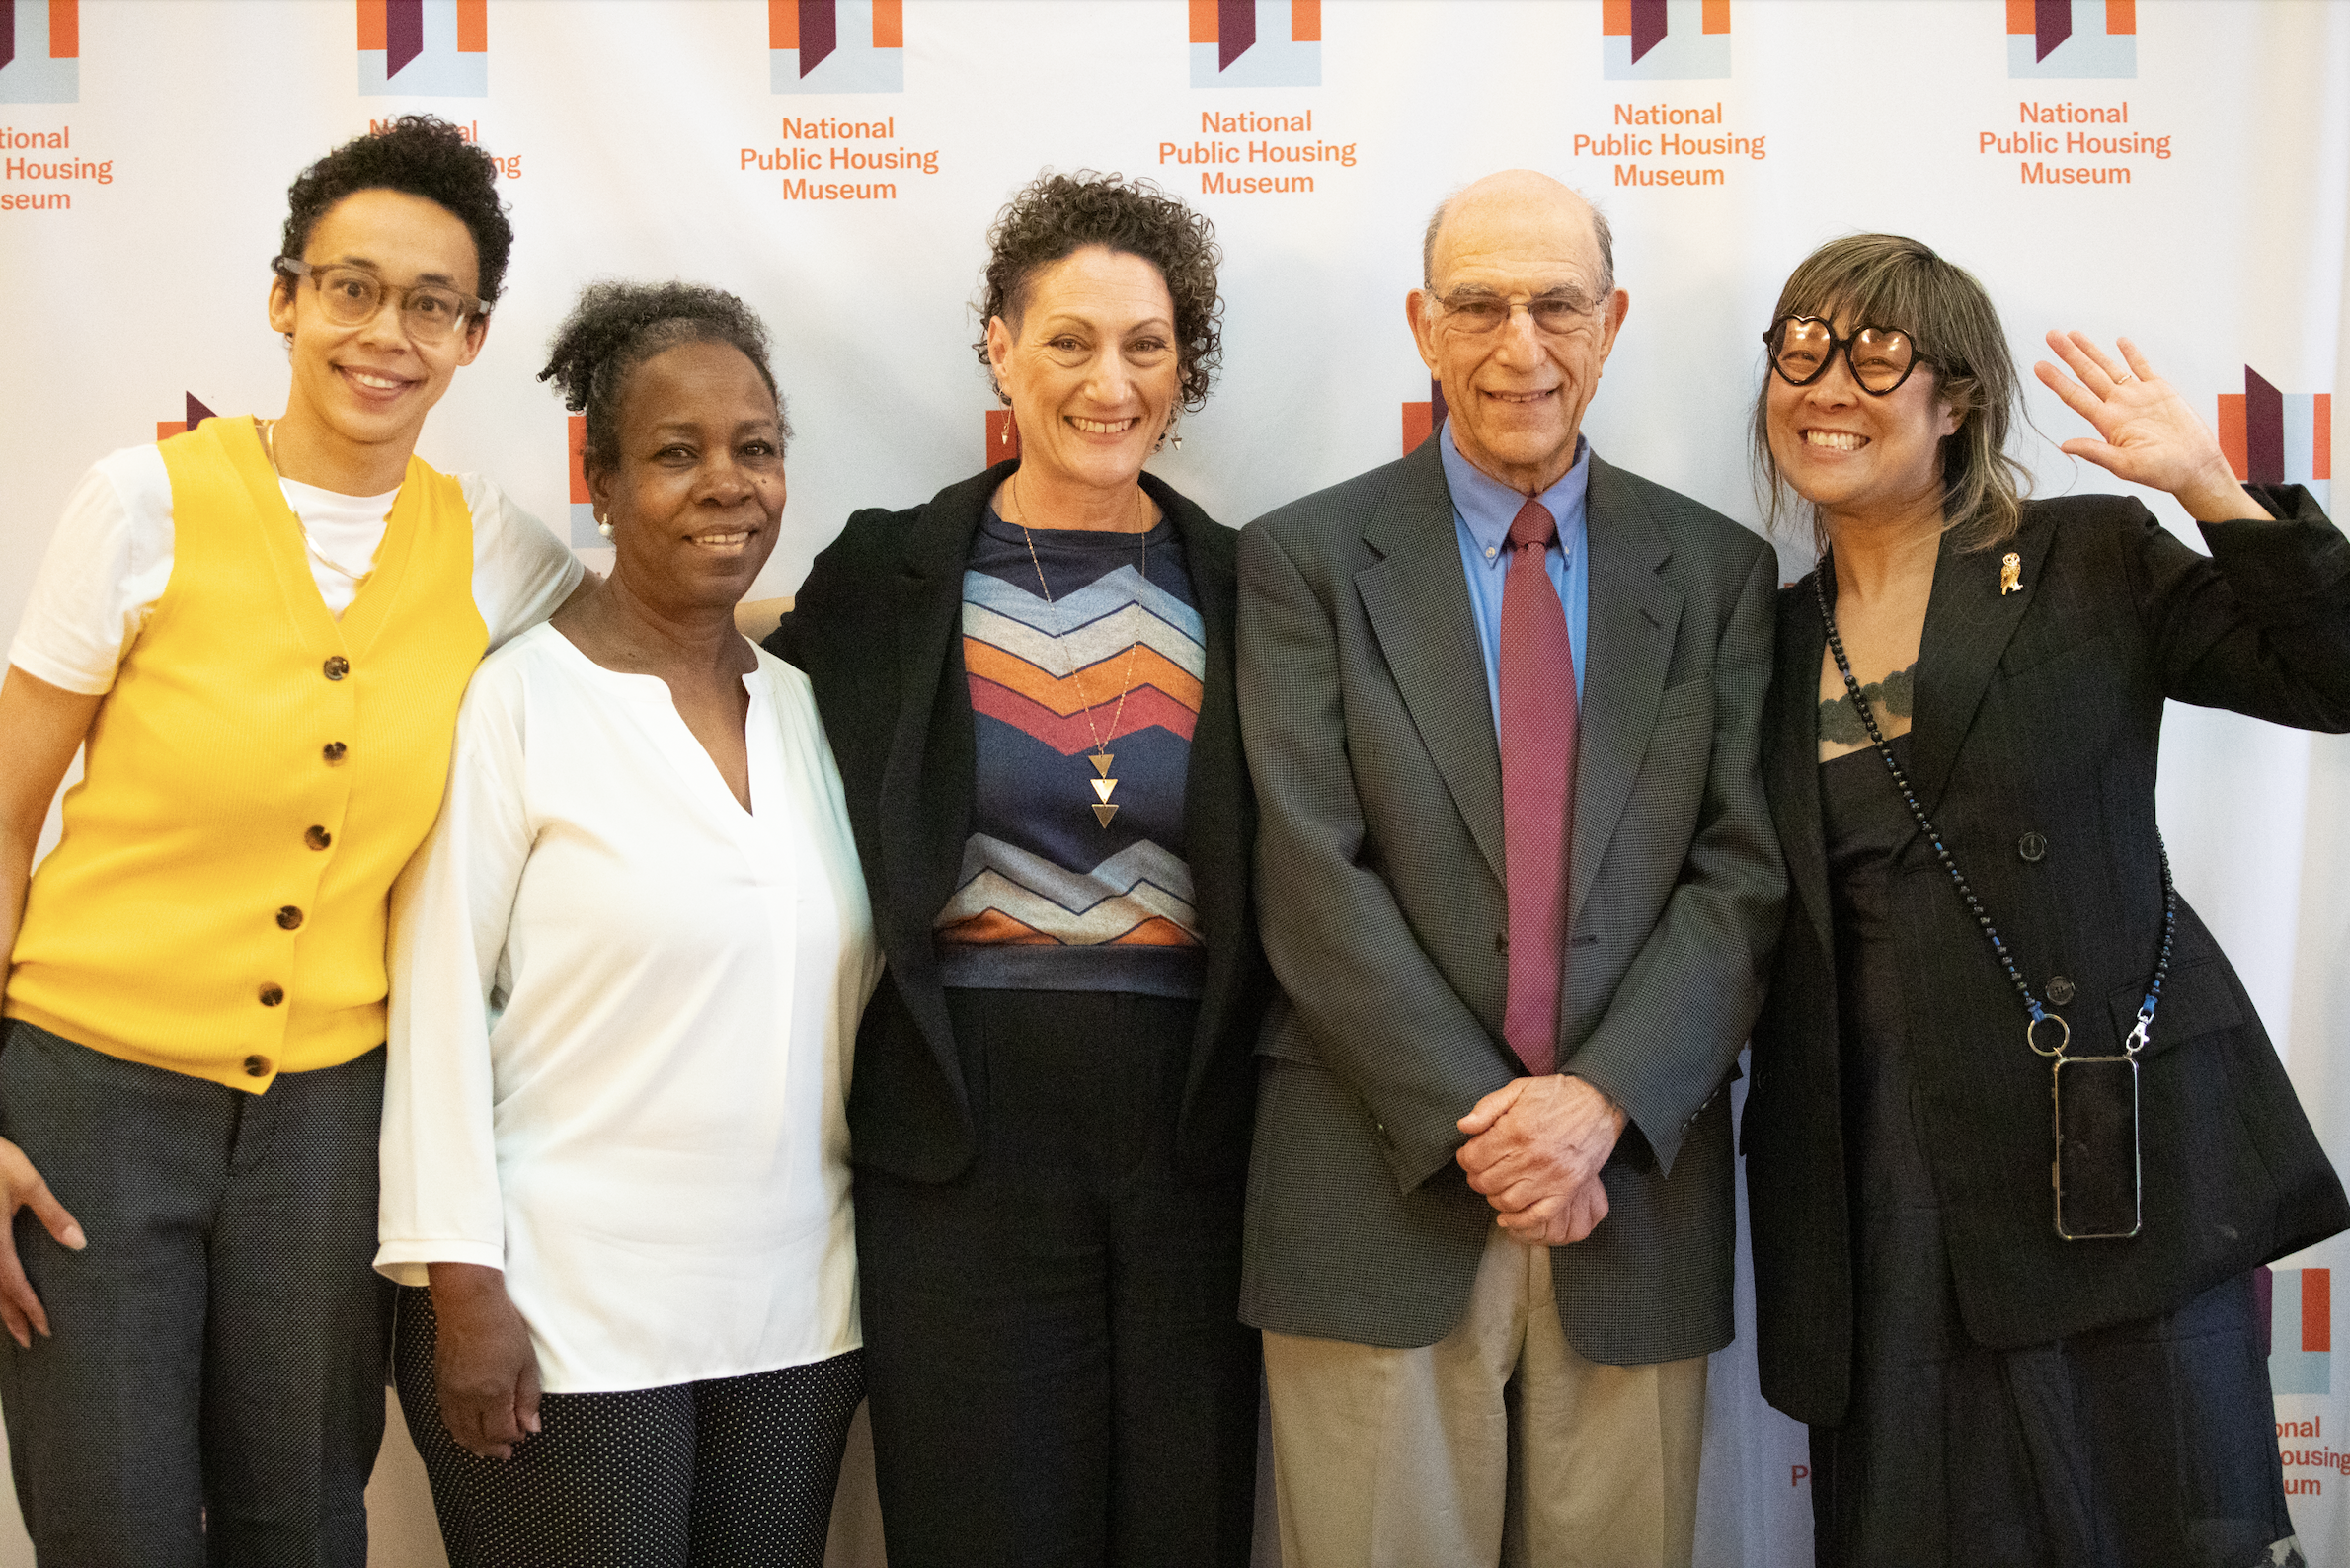  Authors Richard and Leah Rothstein stand with National Public Housing Museum Associate Director Tiff Beatty, Executive Director Lisa Yun Lee, and Board Member Deborah Bennett.  They all stand in front of a branded white banner with small National Pu